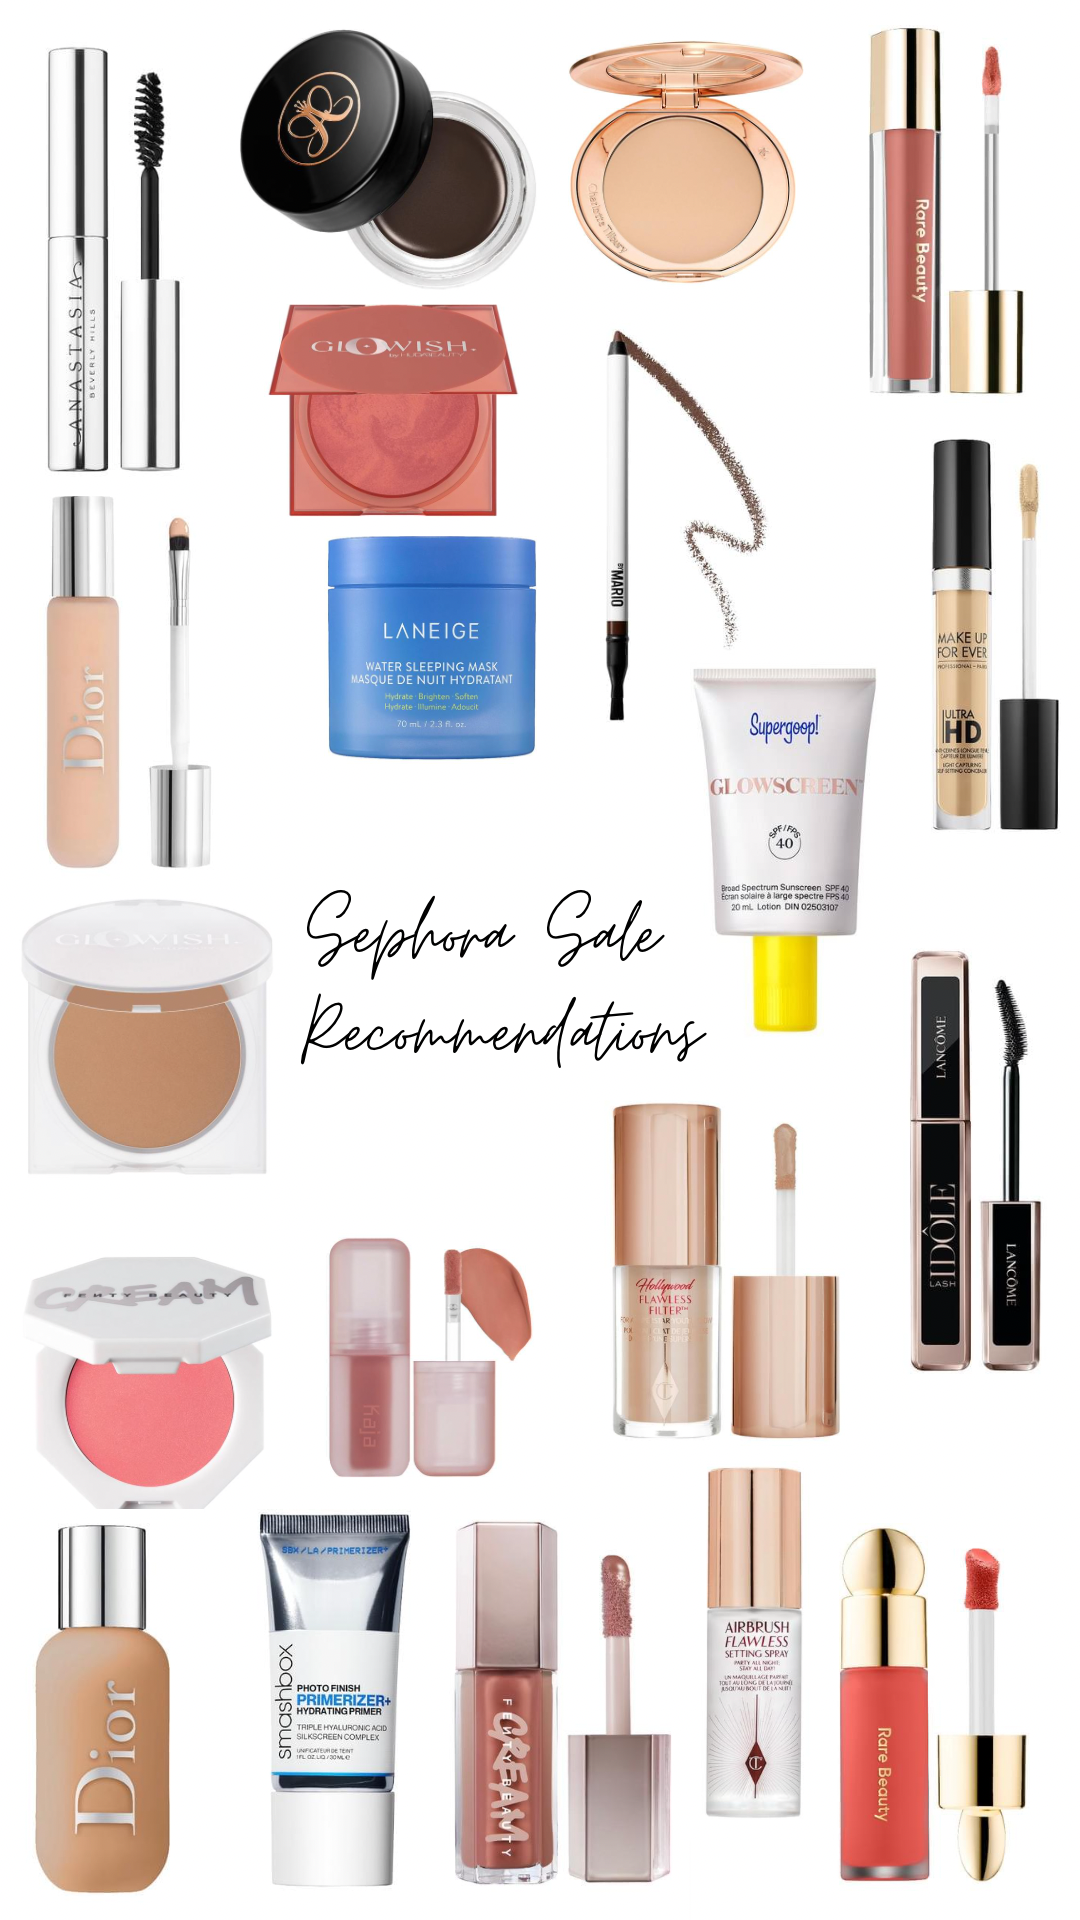 Sephora Spring Sale Recommendations